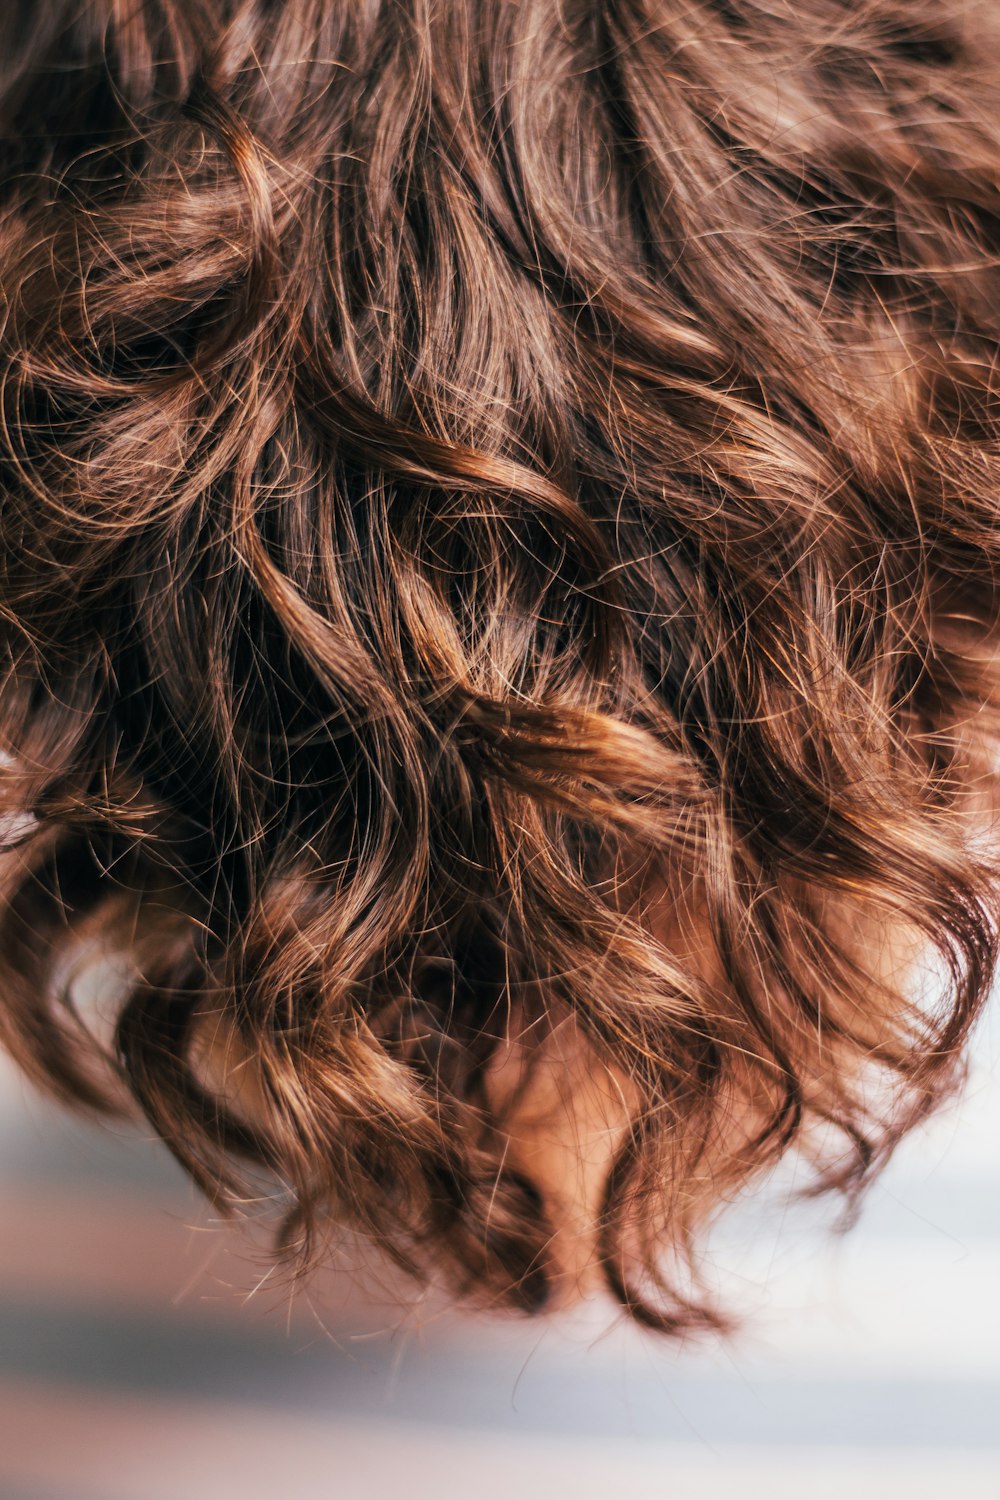 Messy Hair Pictures  Download Free Images on Unsplash